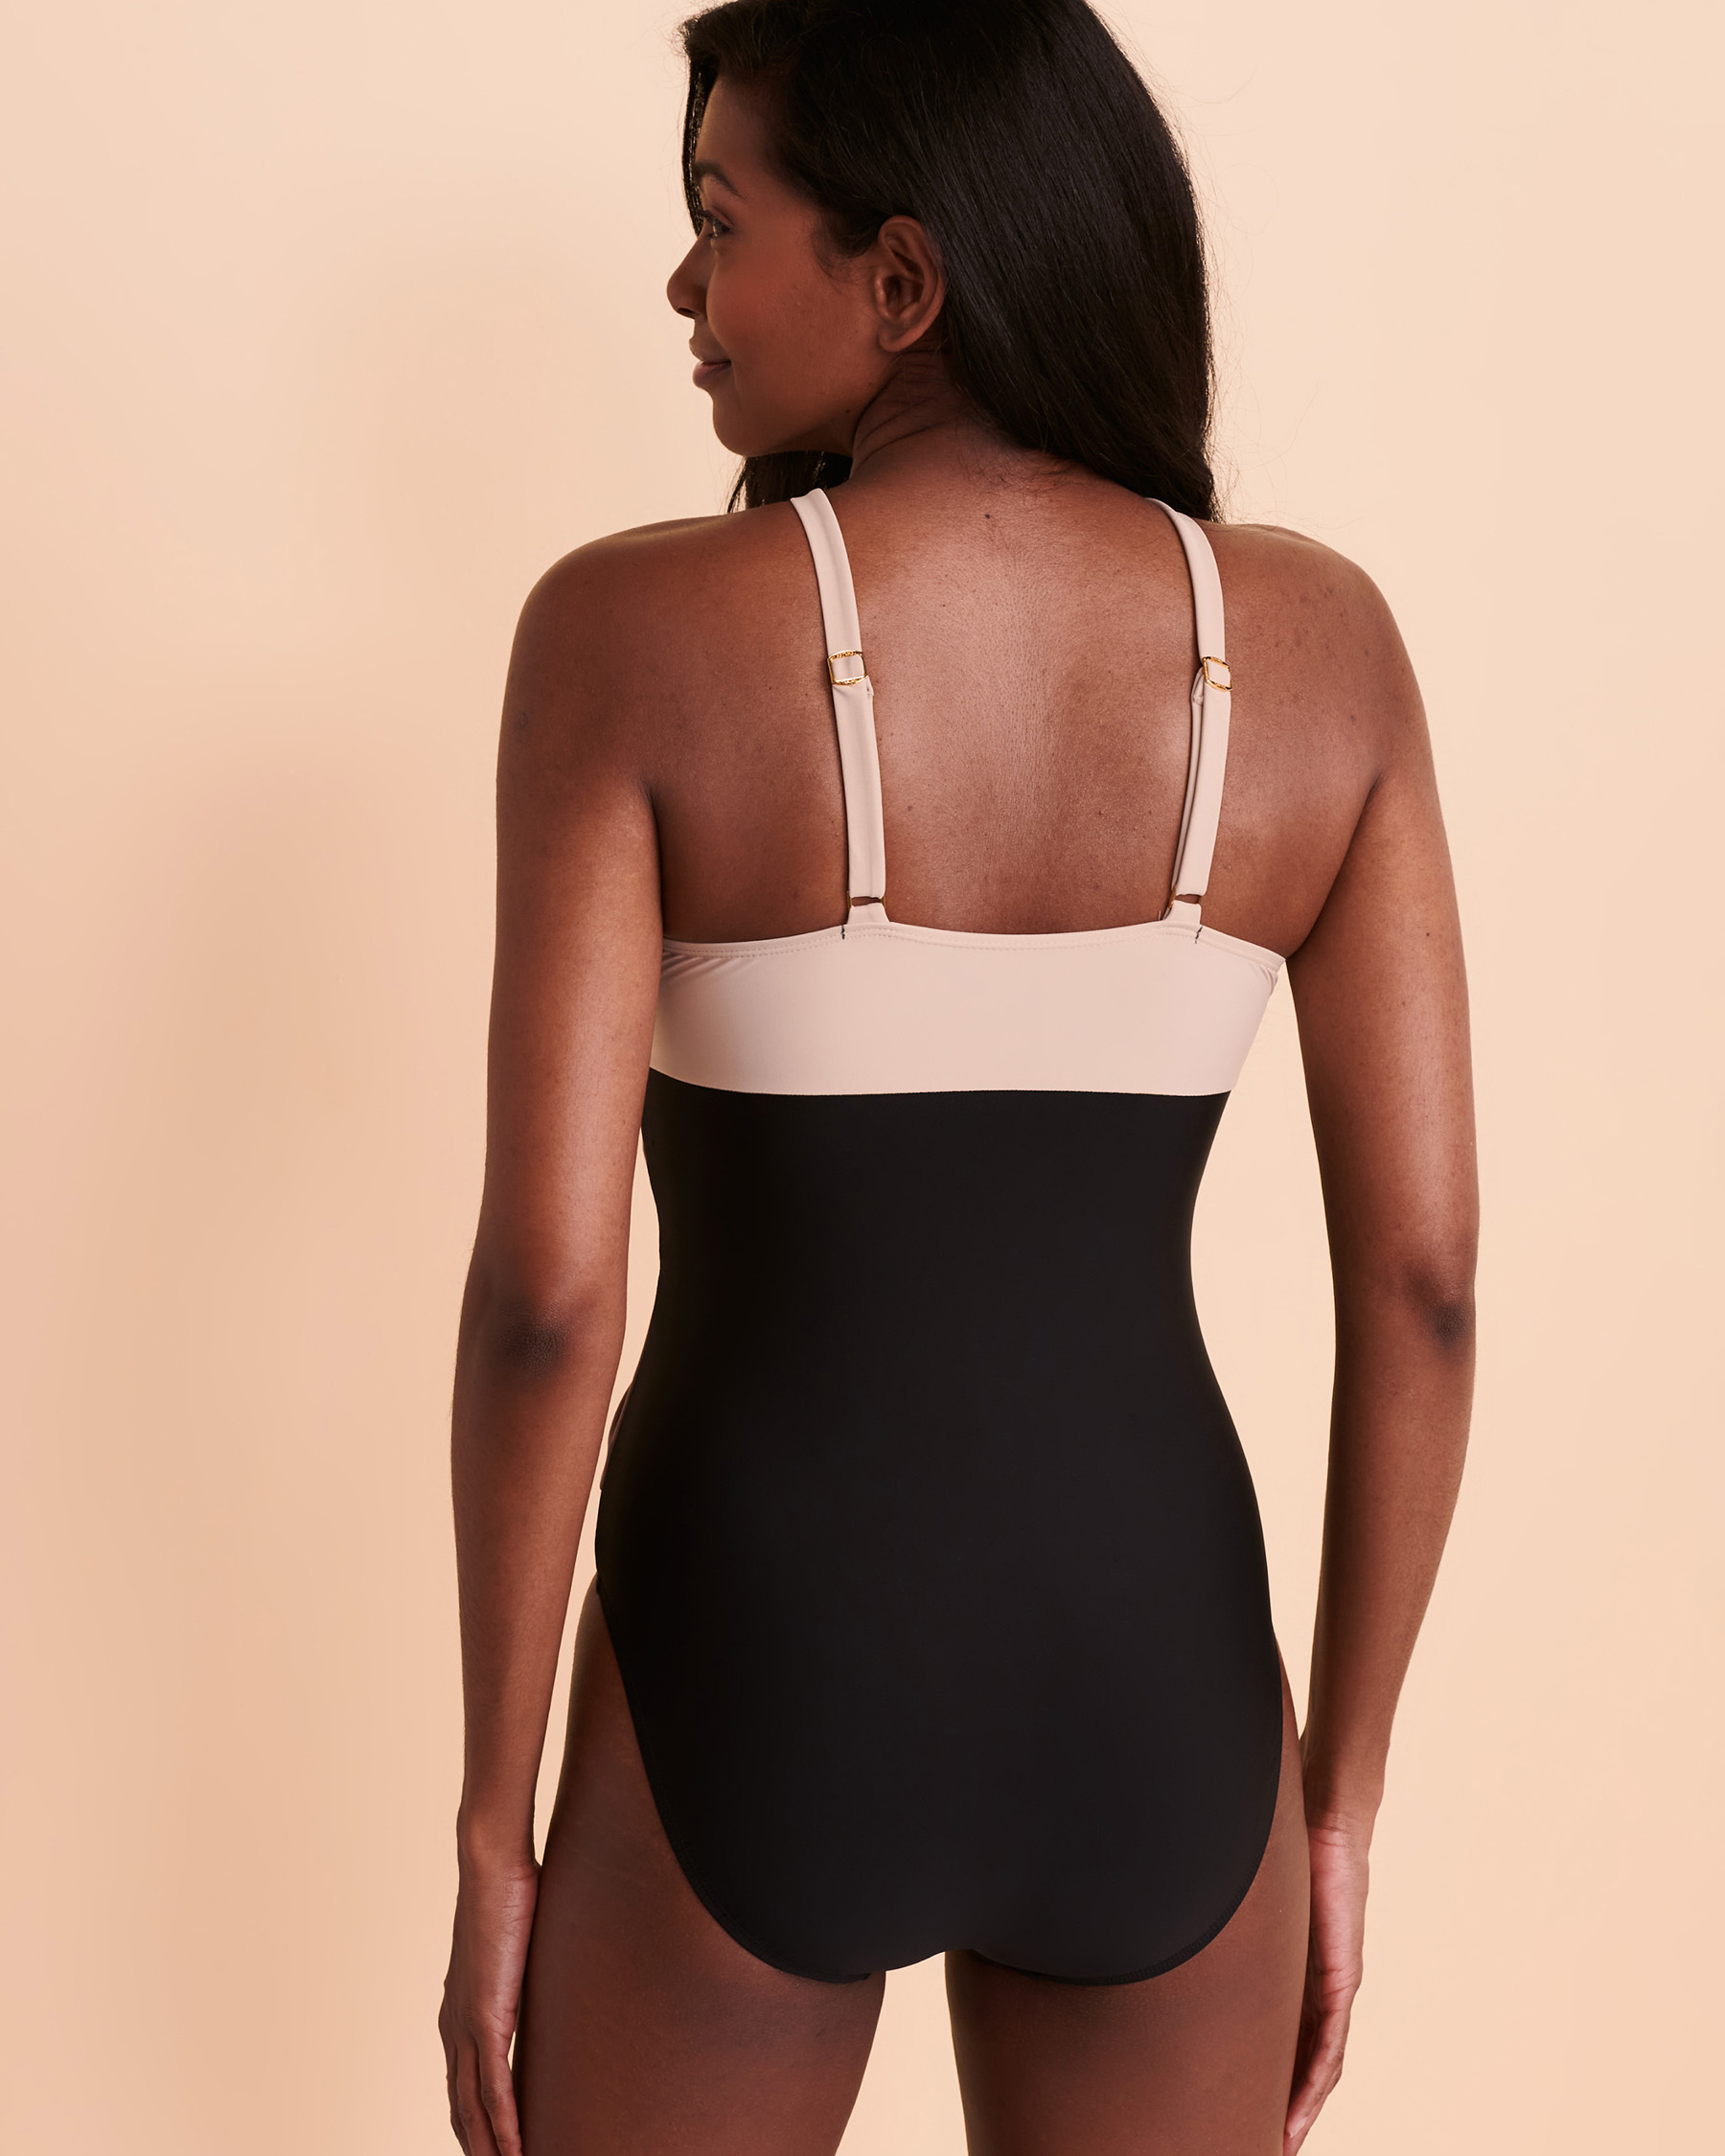 BEYOND CONTROL SOLID ESSENTIALS High Neck One-piece Swimsuit Sand LXSE00829H - View2